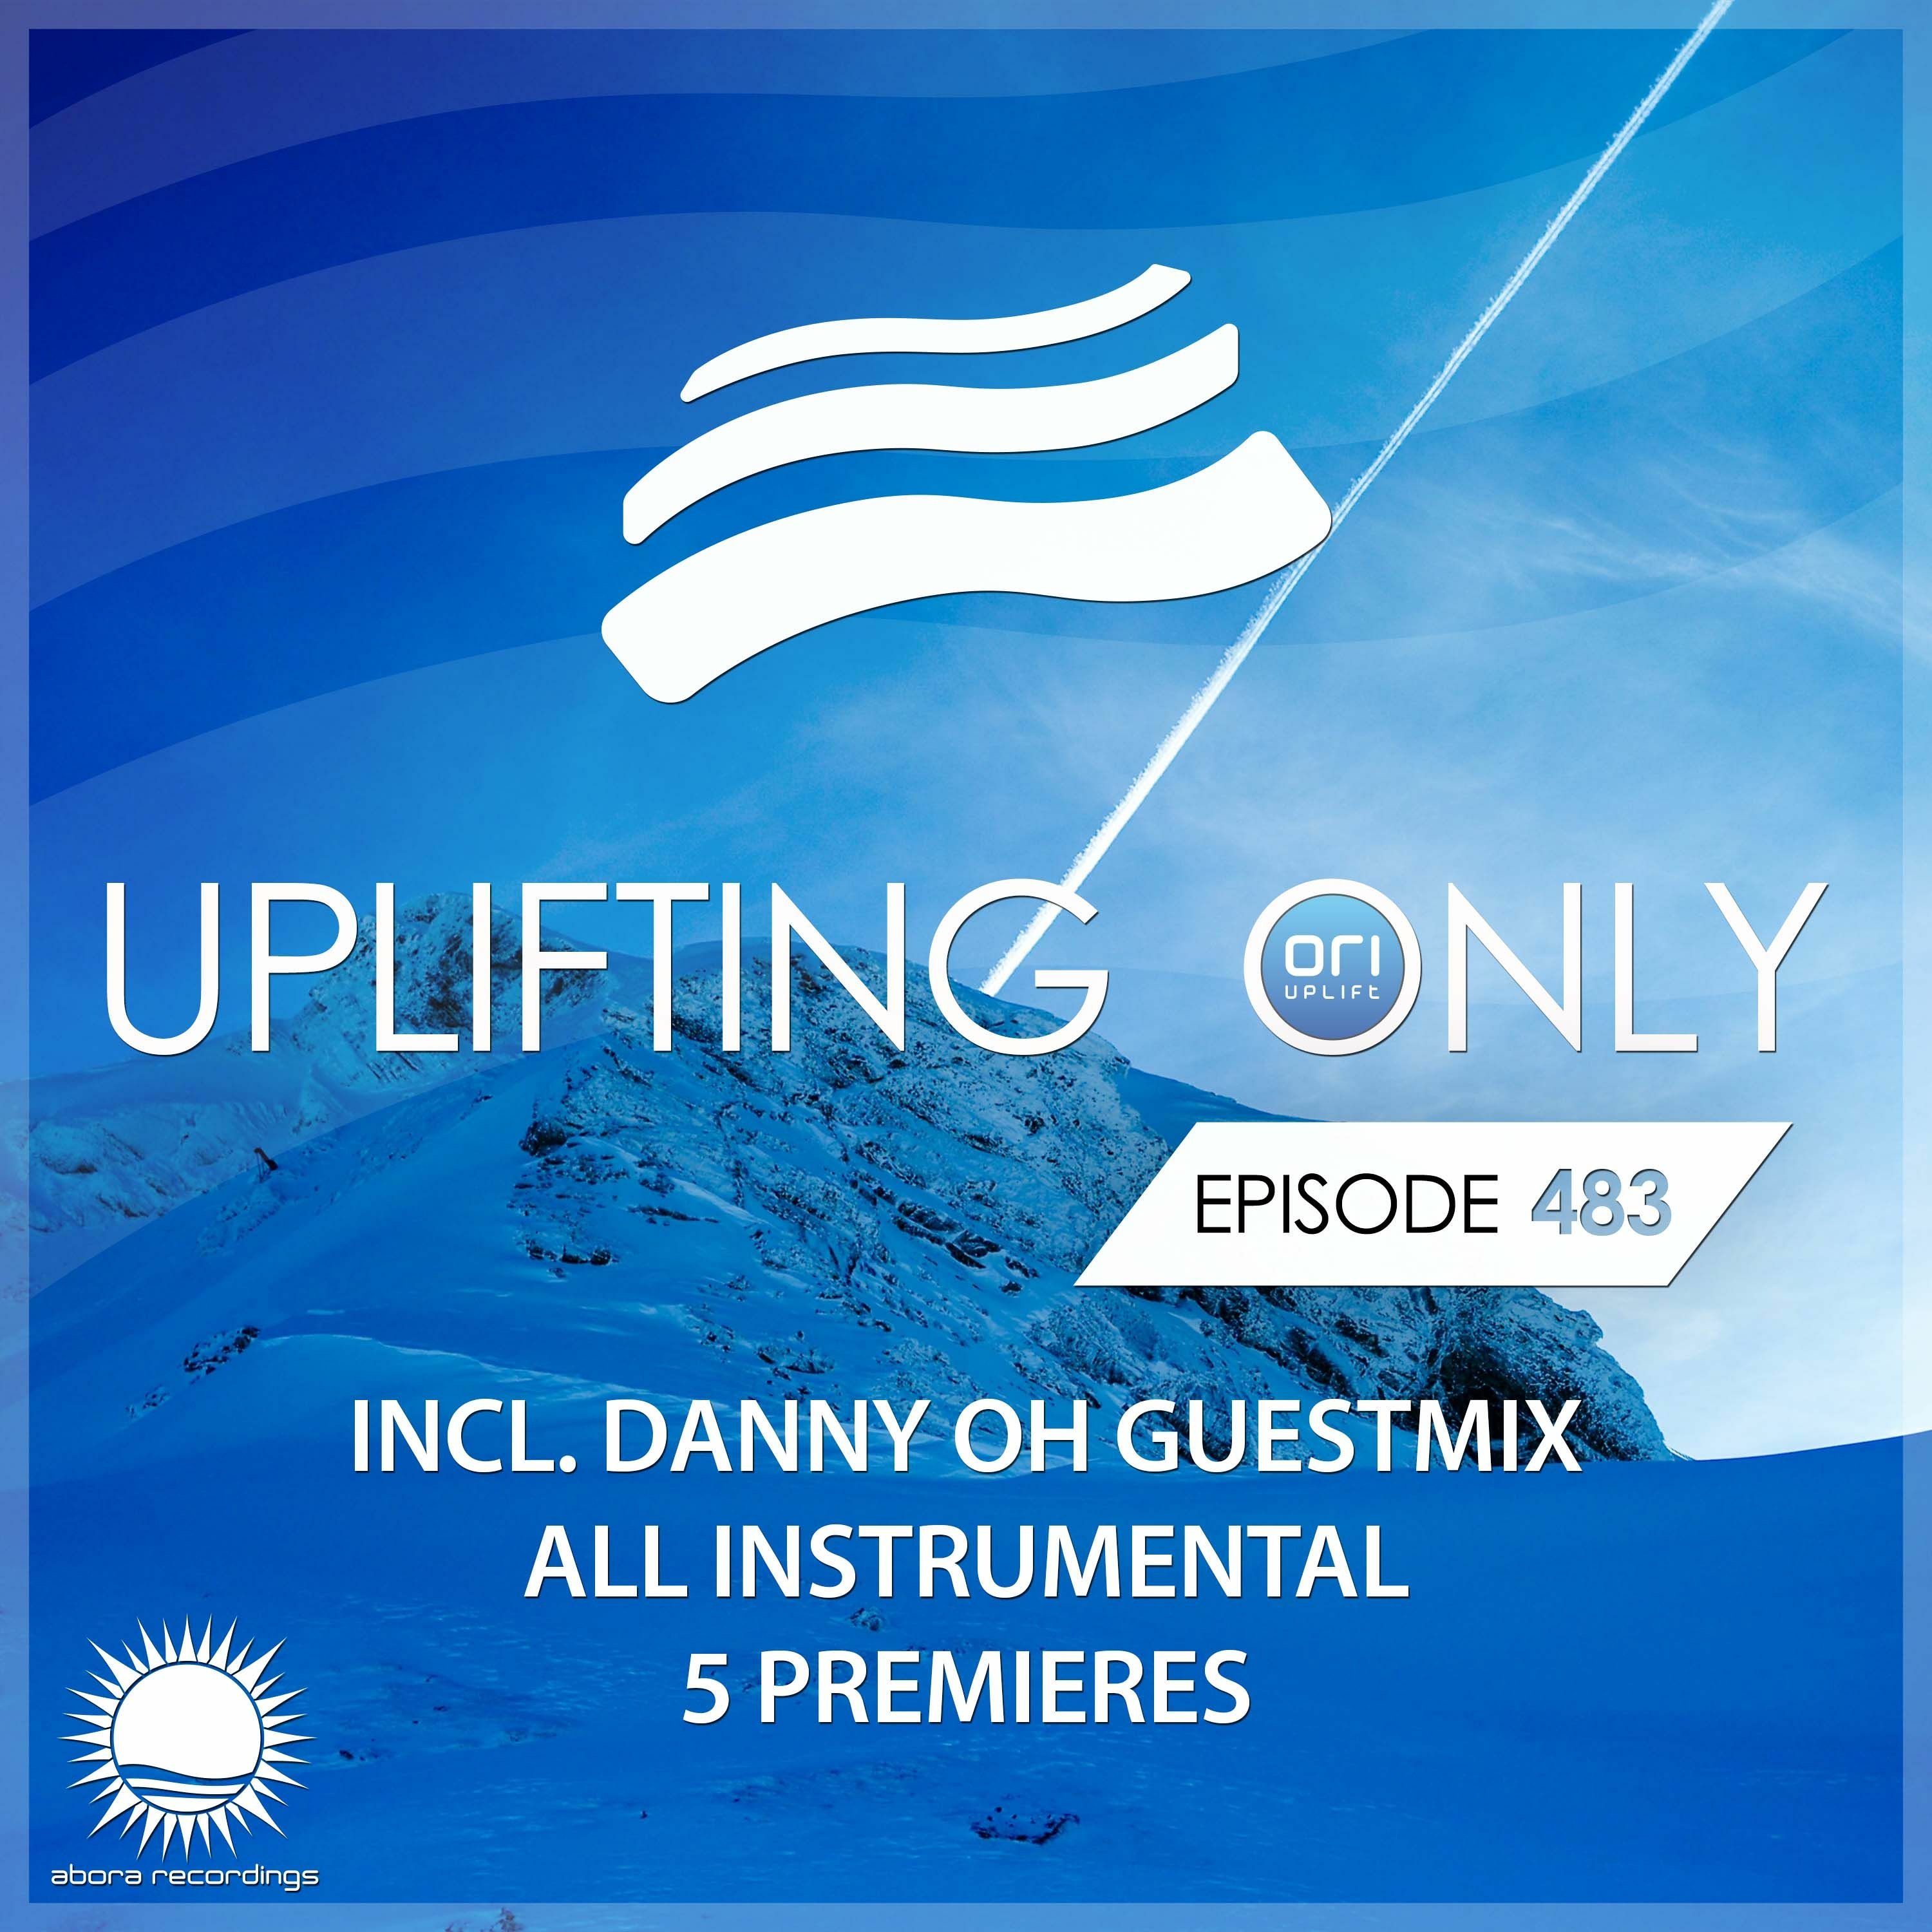 Uplifting Only 483 [No Talking] (May 12, 2022) (incl. Danny Oh Guestmix) [All Instrumental]